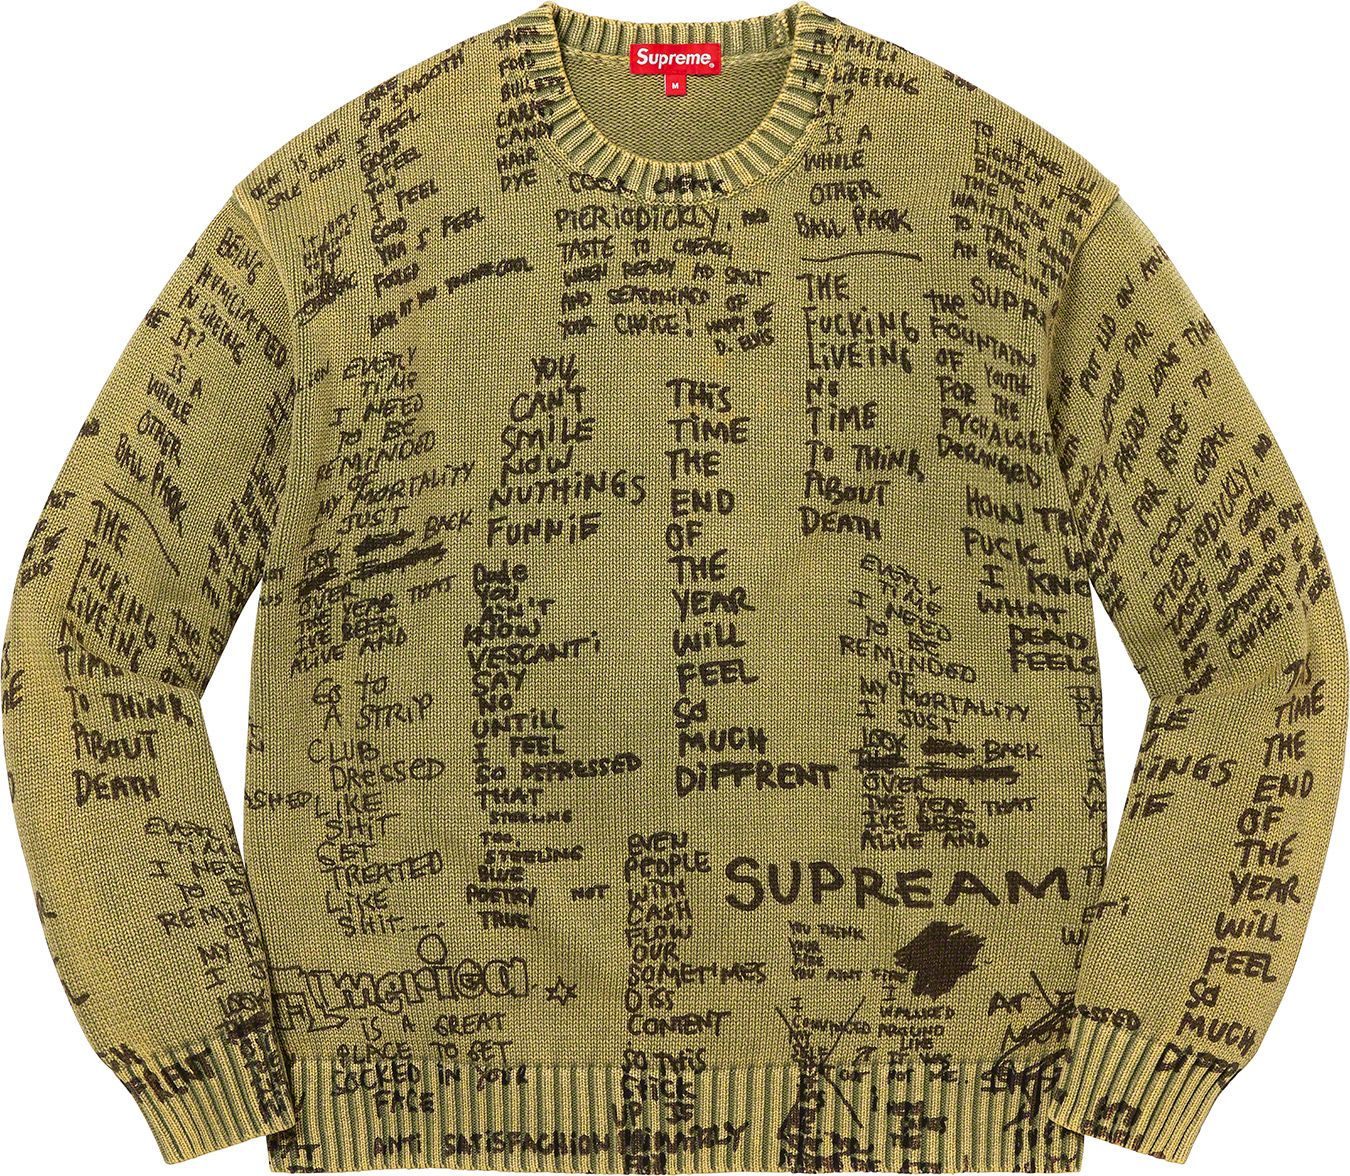 Printed Washed Sweater - Spring/Summer 2023 Preview – Supreme